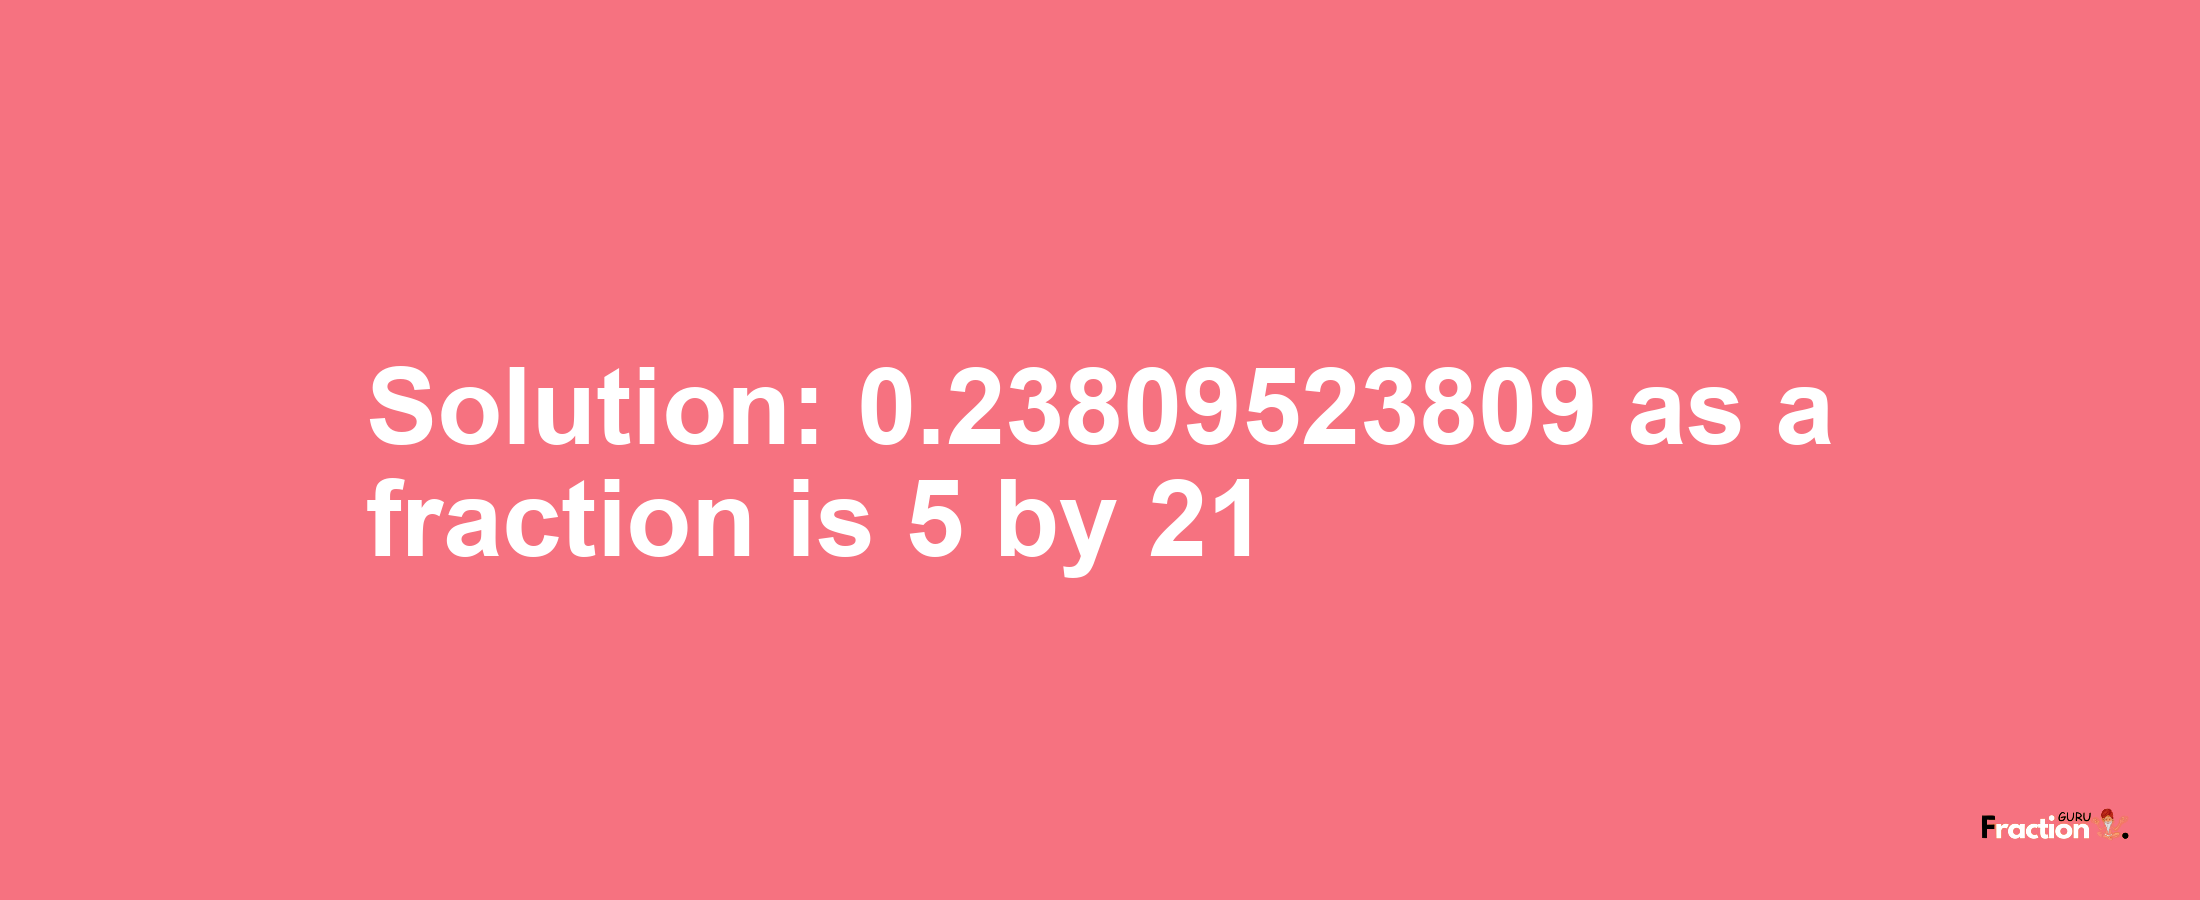 Solution:0.23809523809 as a fraction is 5/21